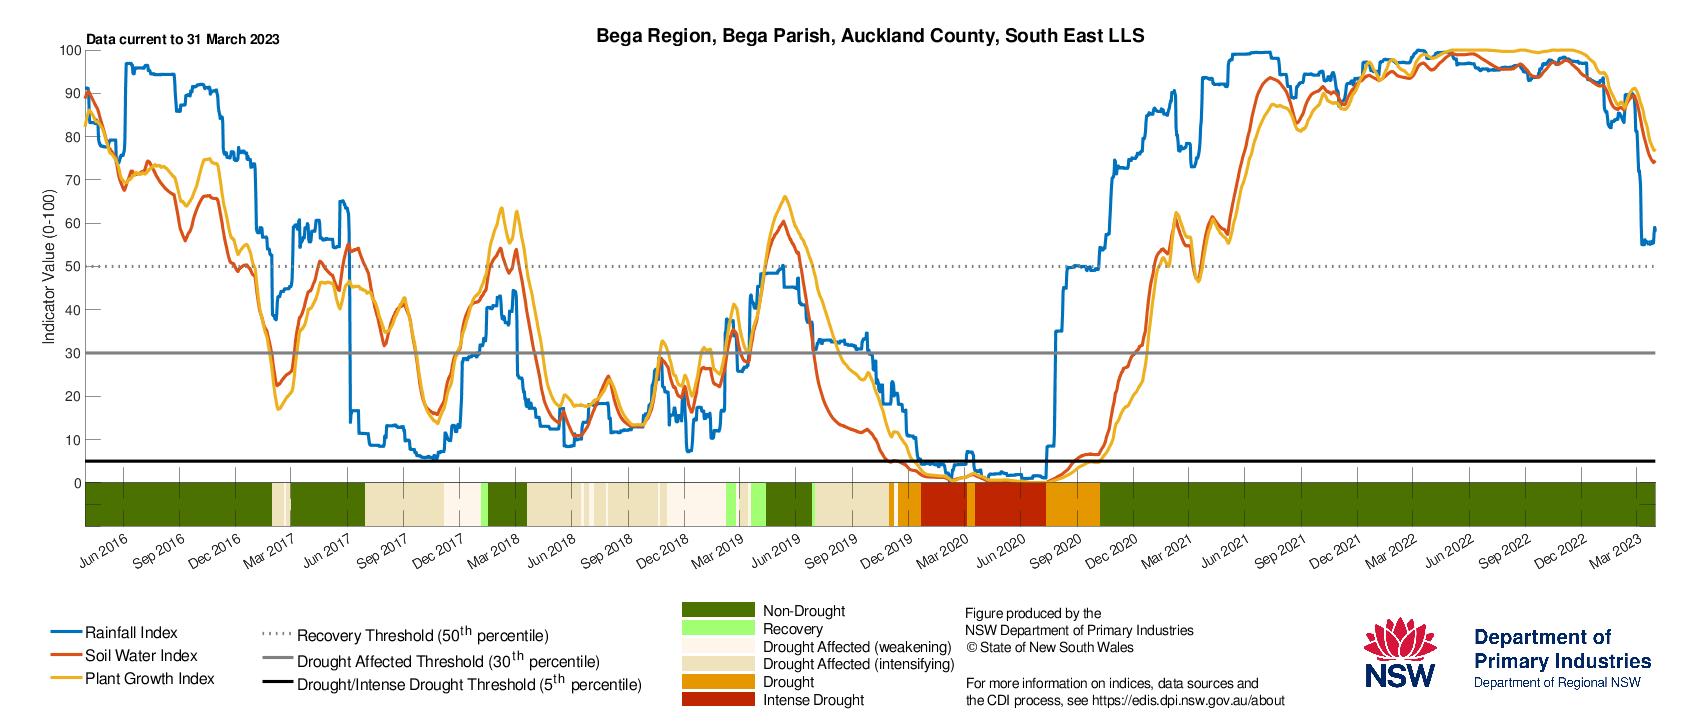 Figure 32. Drought History charts for Bega, Cooma and Goulburn in the South East LLS show the current and historical status of the three drought indicators: Rainfall Index, Soil Water Index, and Plant Growth Index